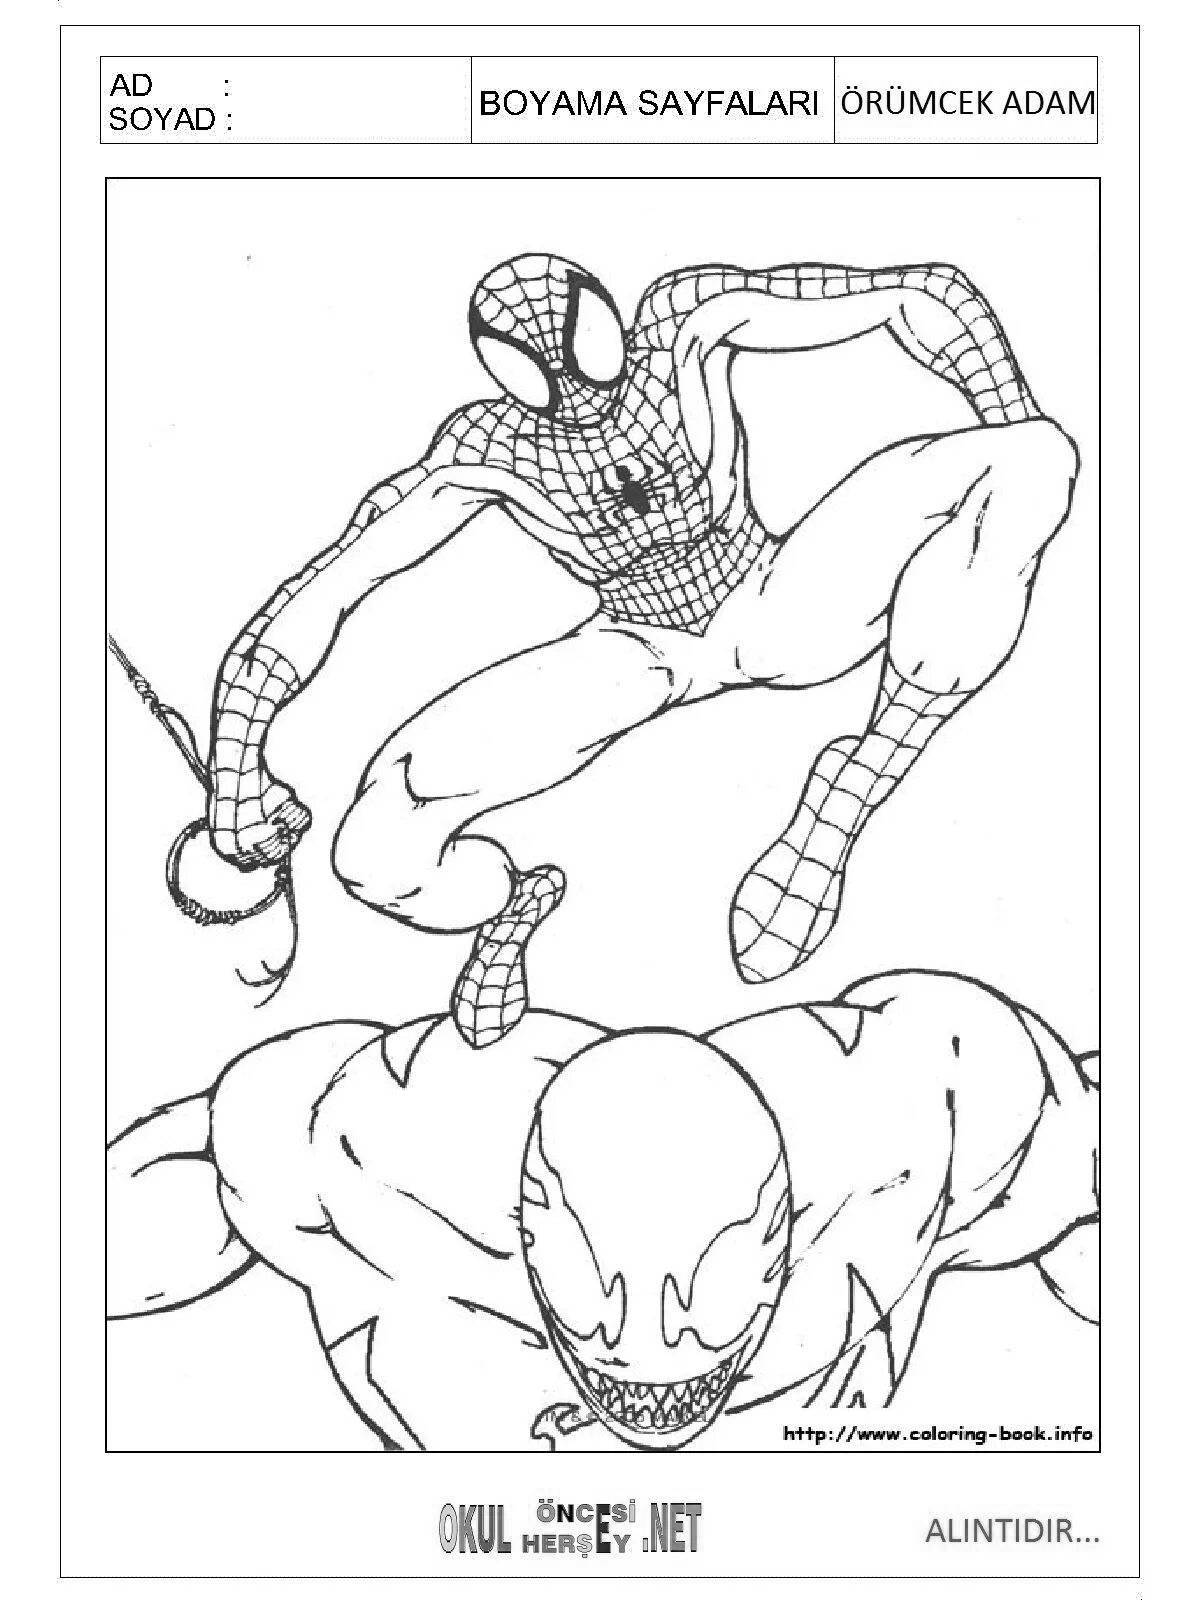 Animated spiderman zombie coloring page